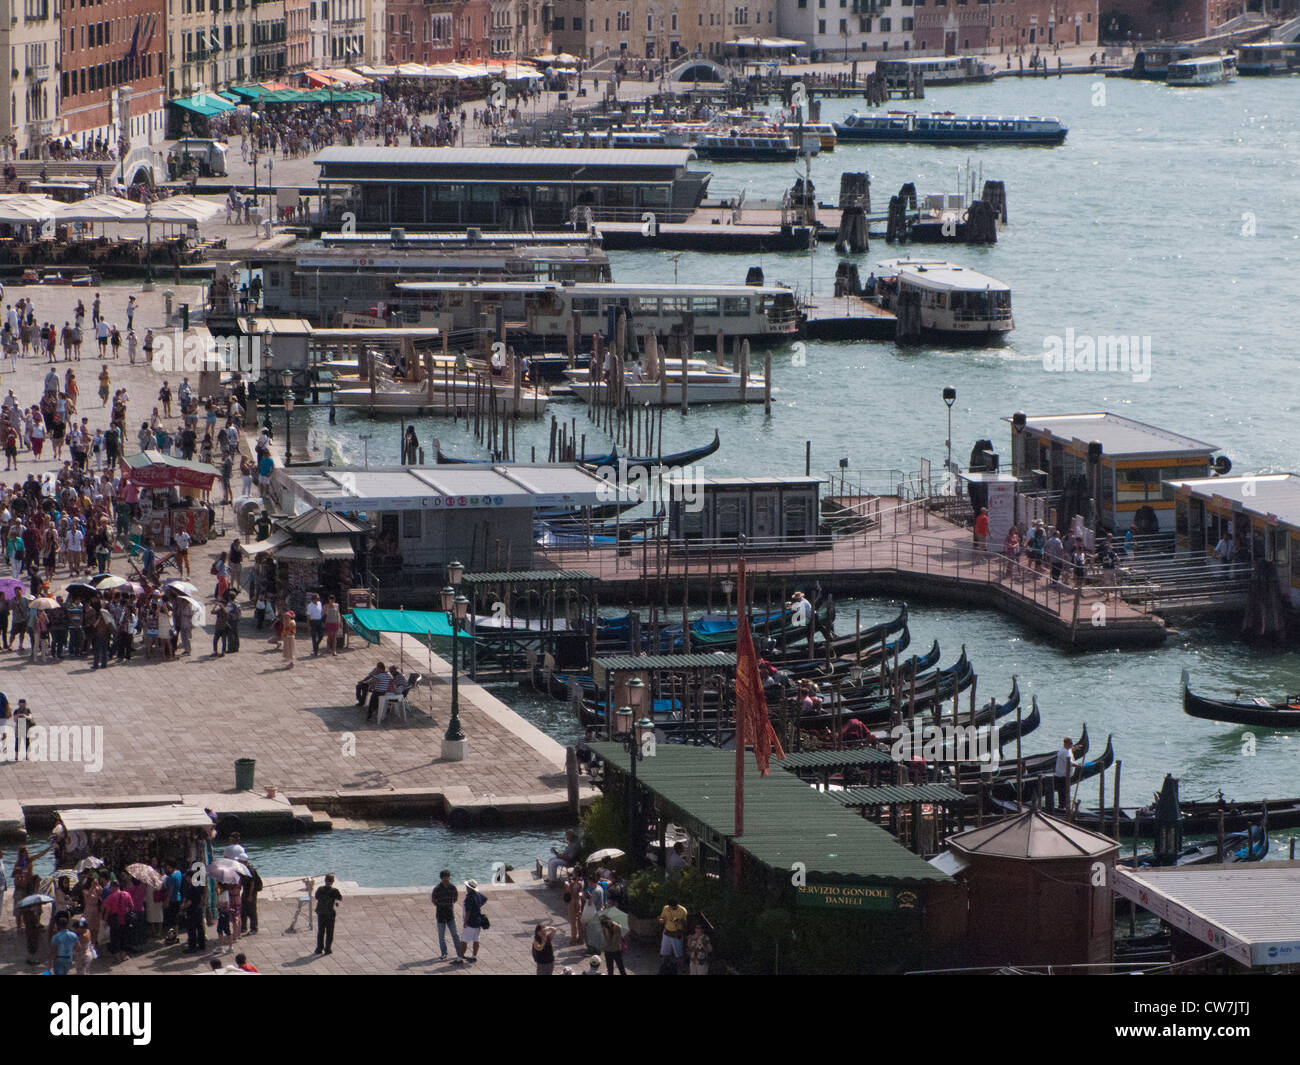 A view of Gondolas on the Lagoon from the Doge's Palace, Venice, Italy Stock Photo